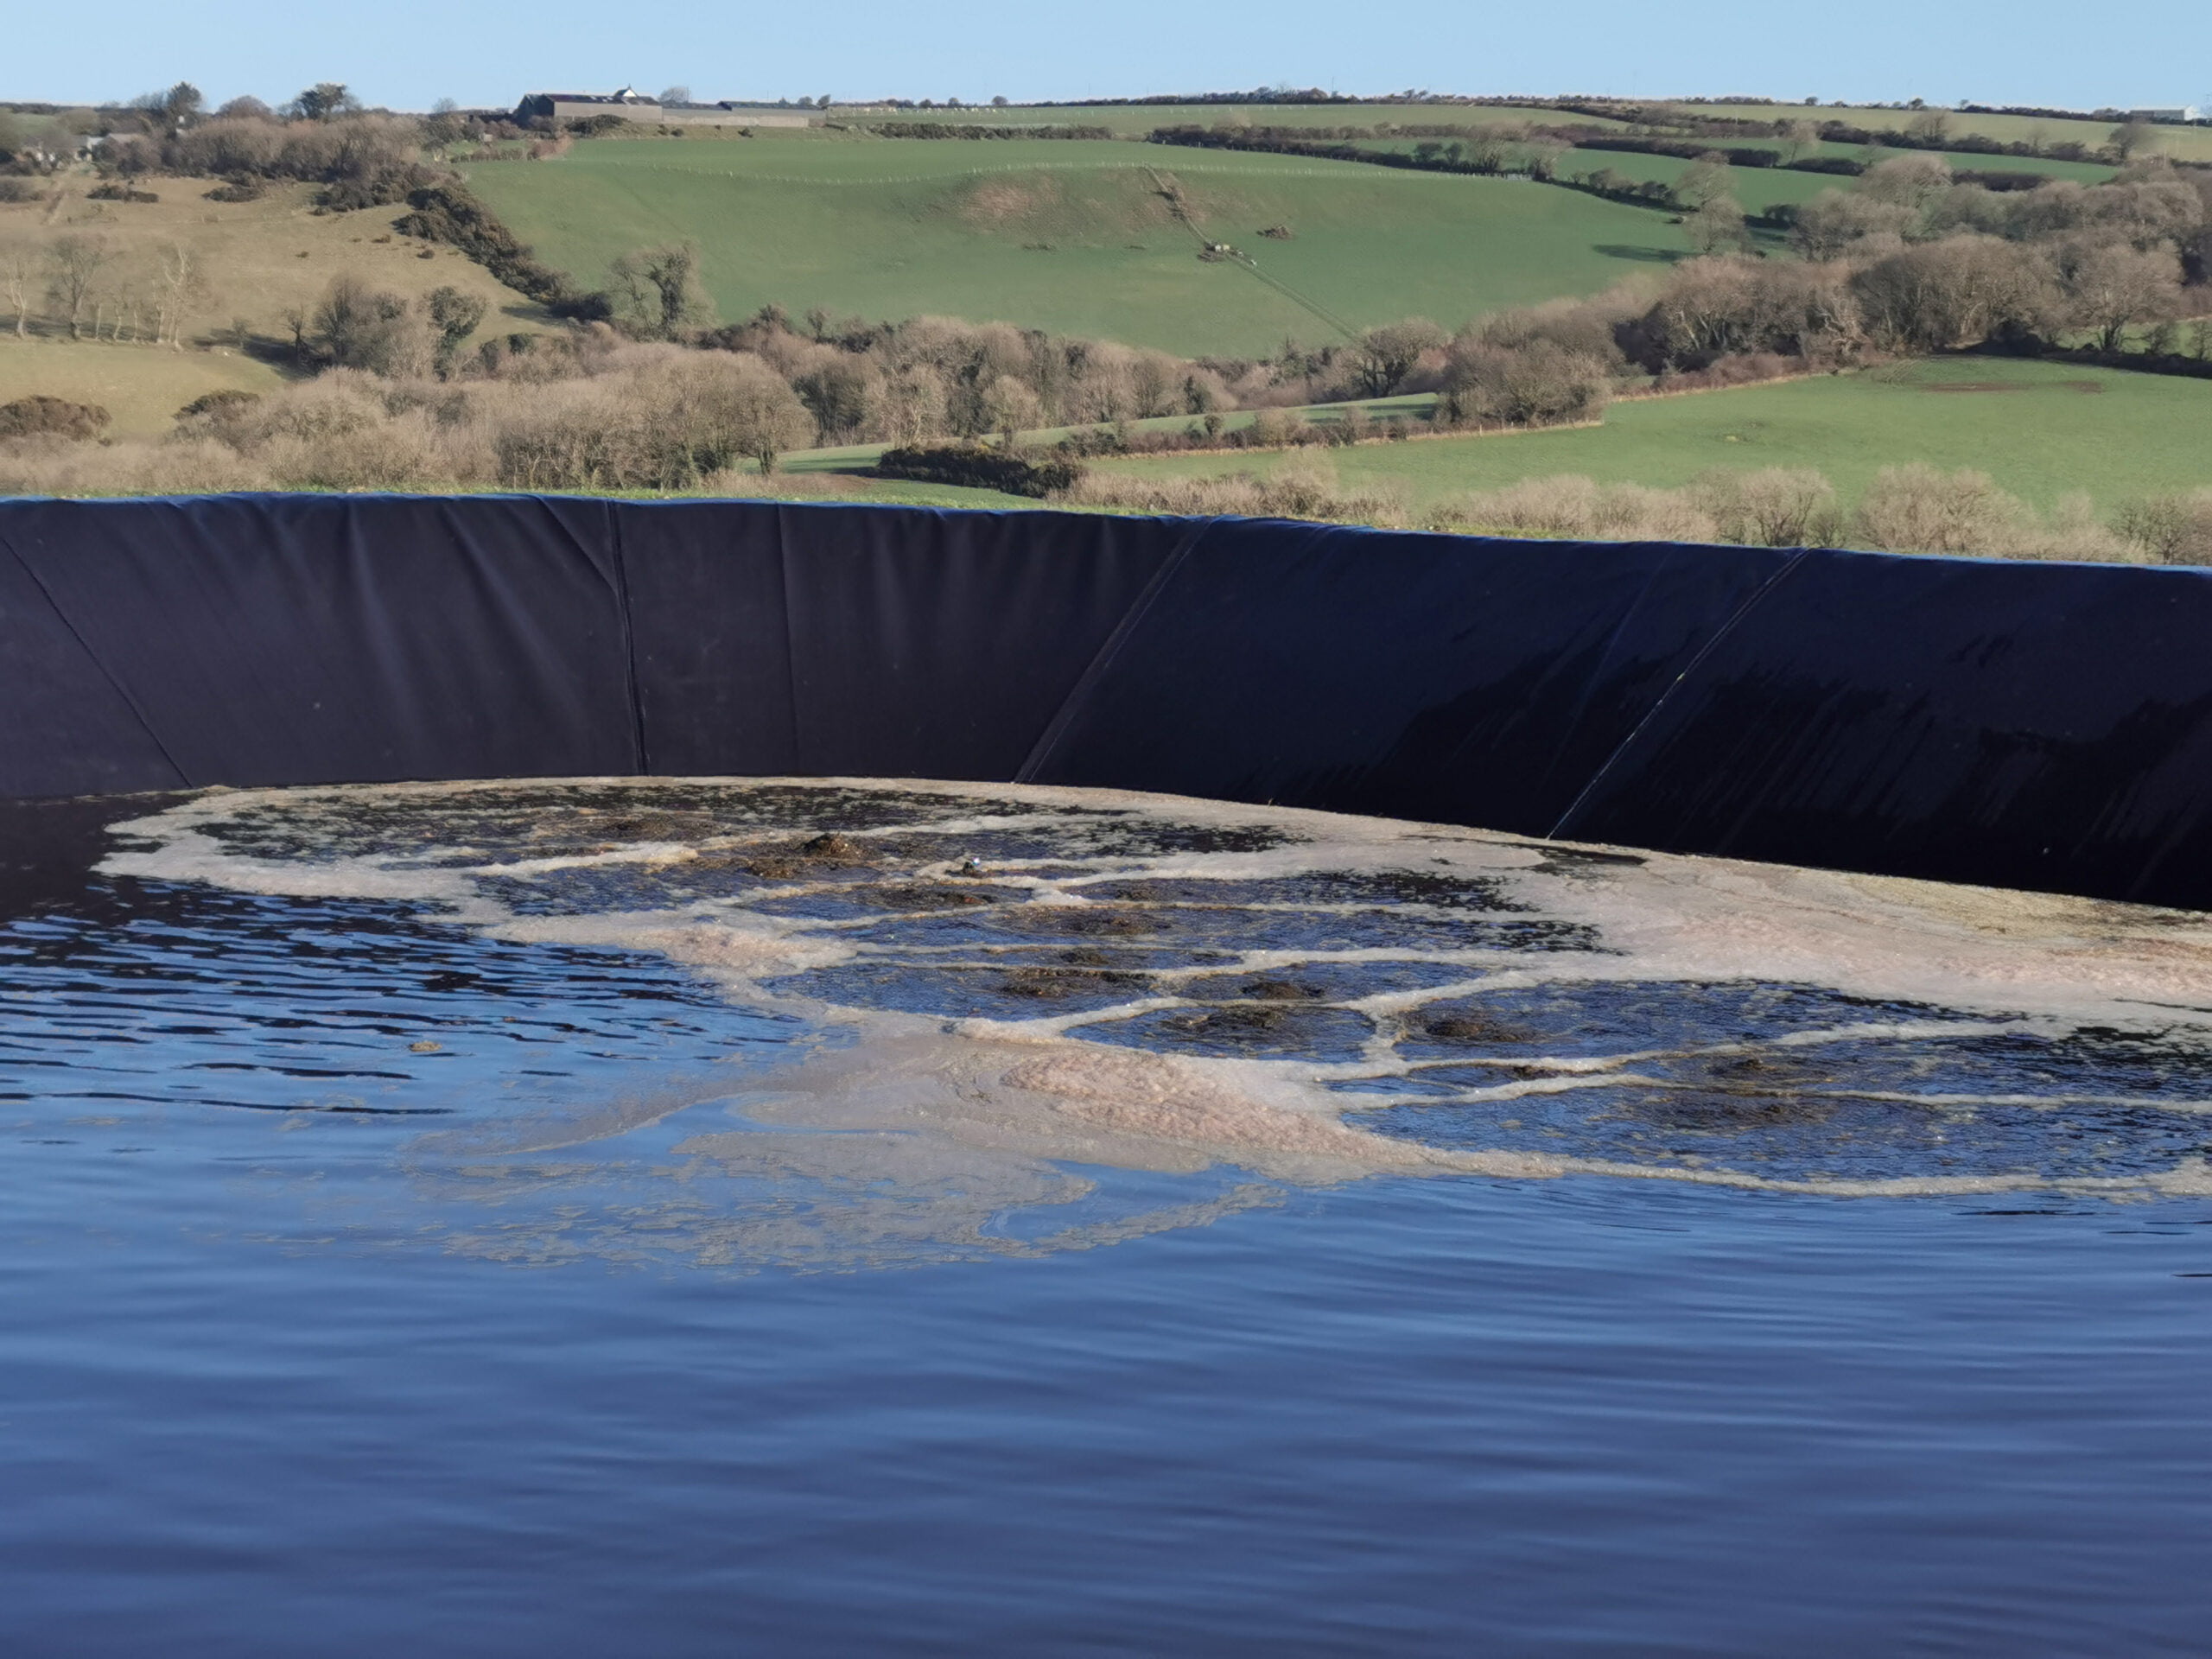 Smart Slurry Aeration System provided and installed by DairyPower